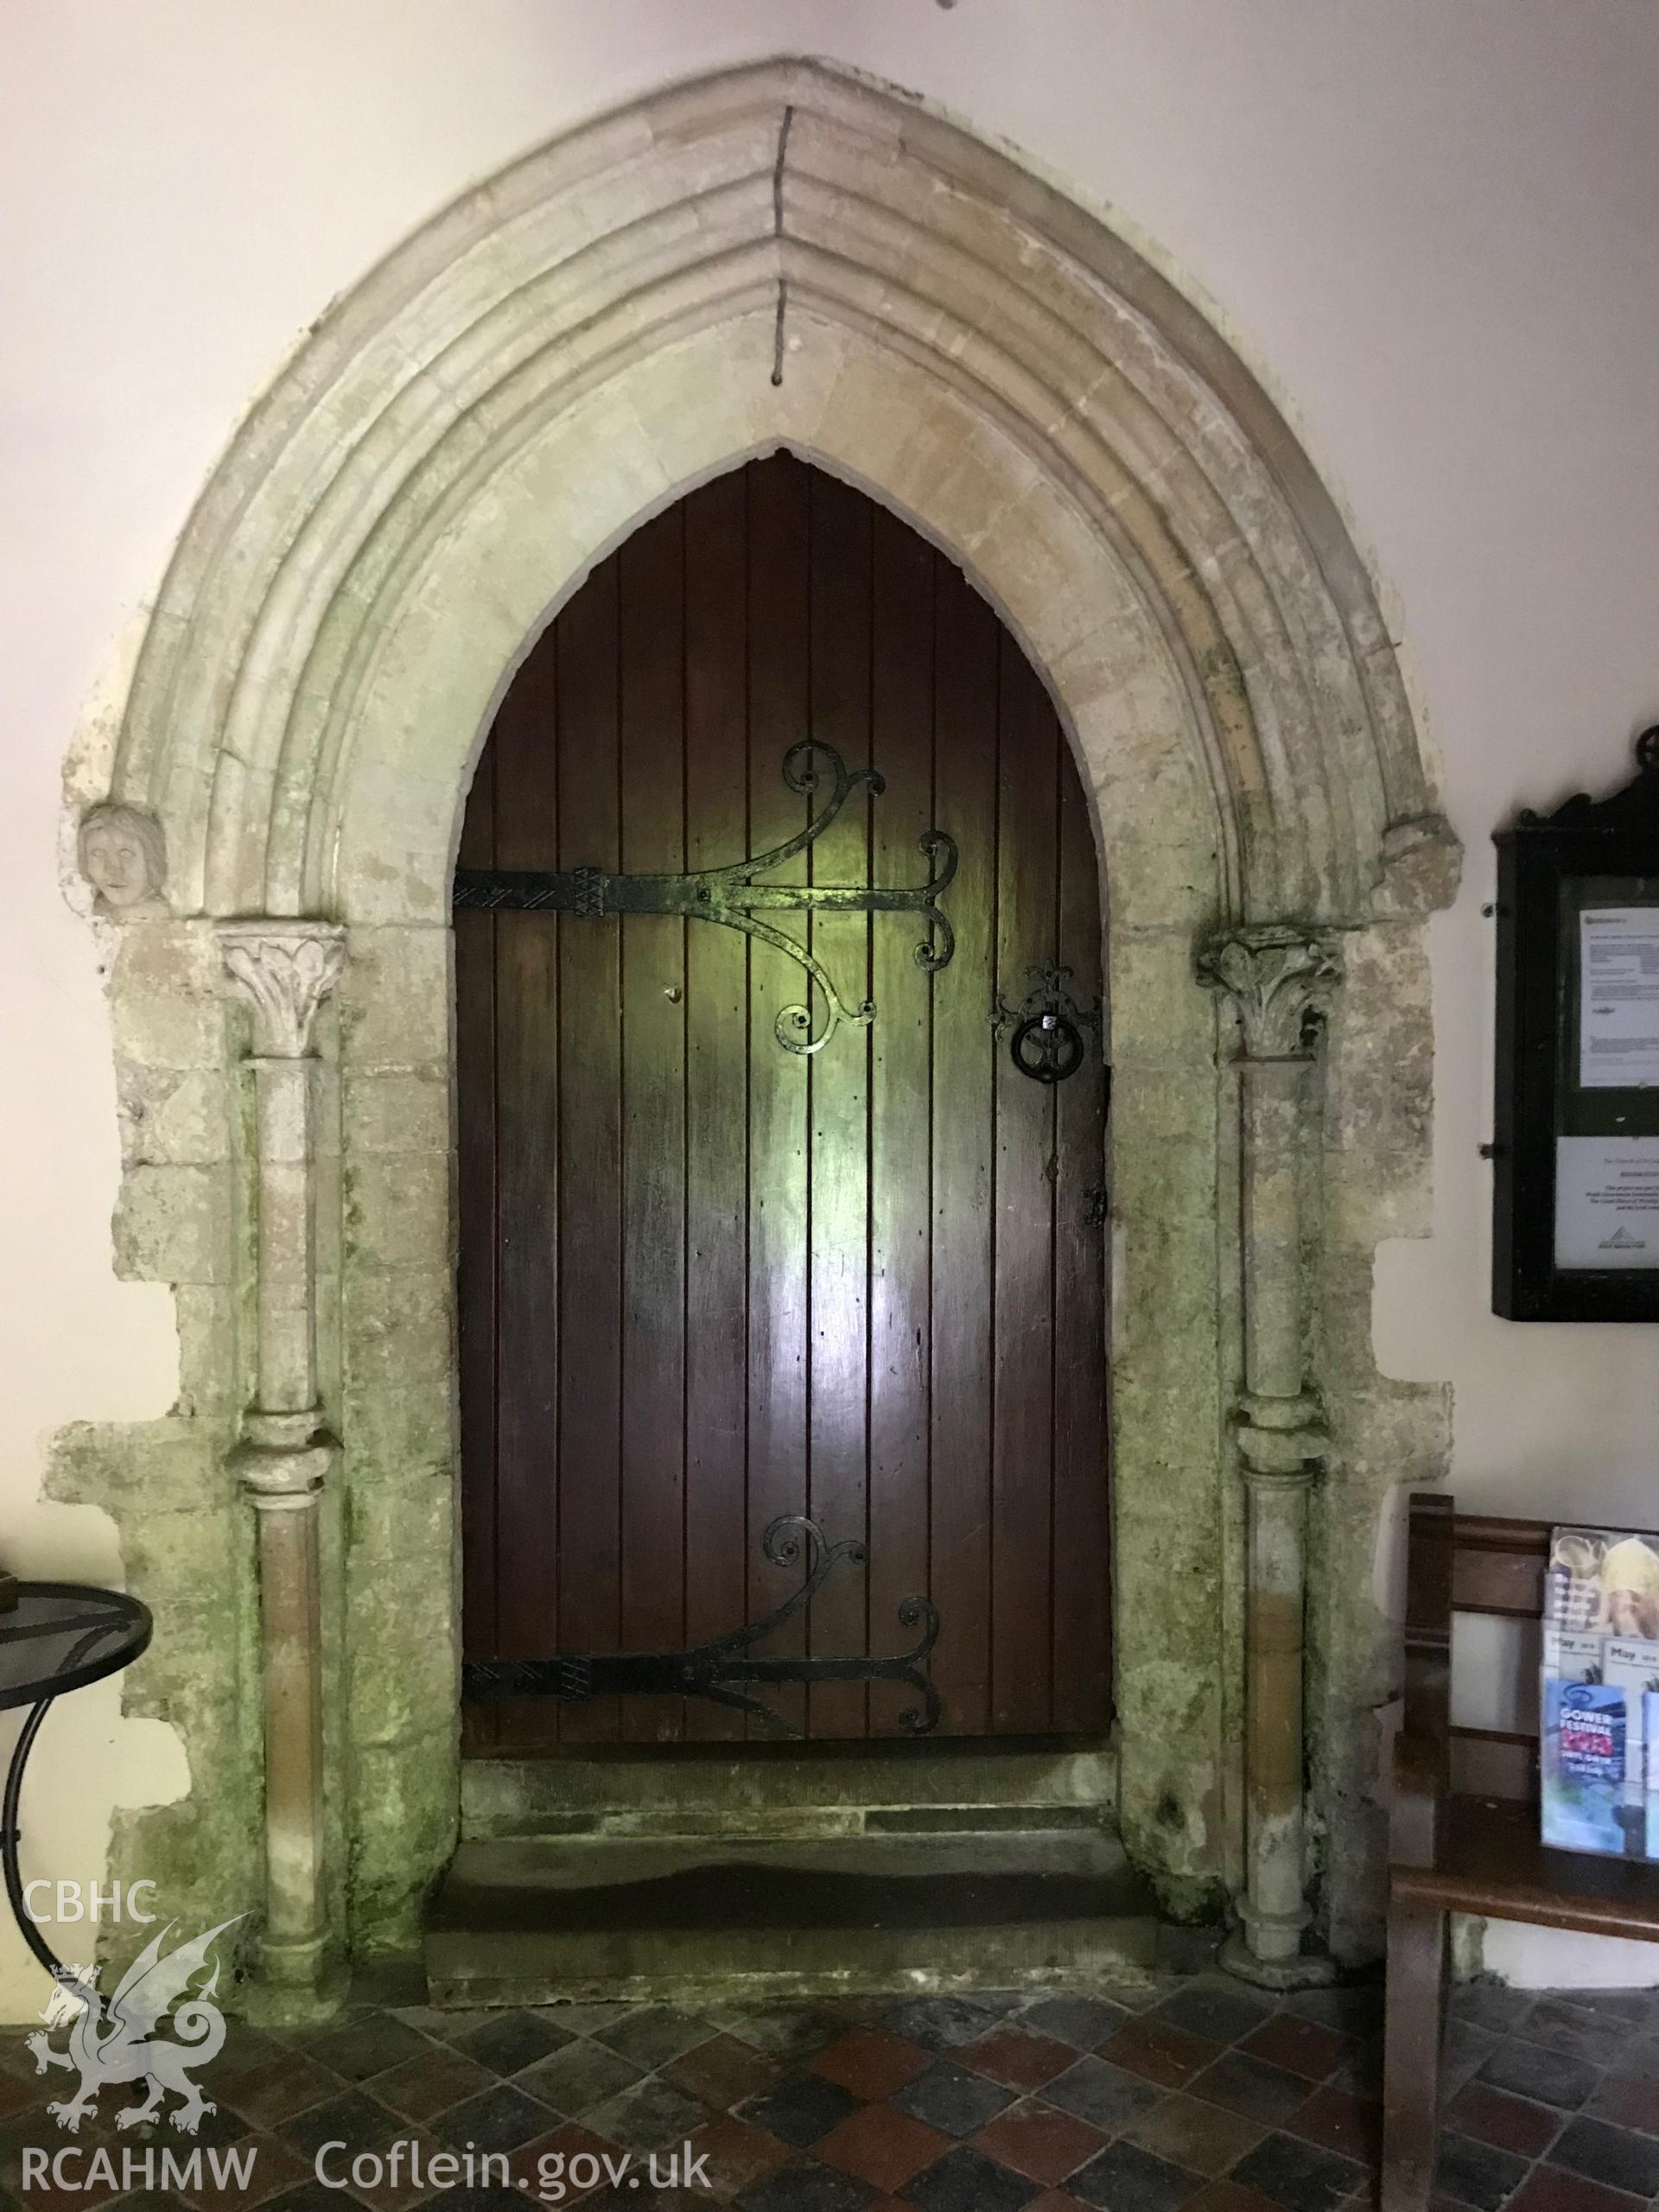 Colour photo showing porch door at St. Cadog's Church, Cheriton, taken by Paul R. Davis, 19th May 2018.